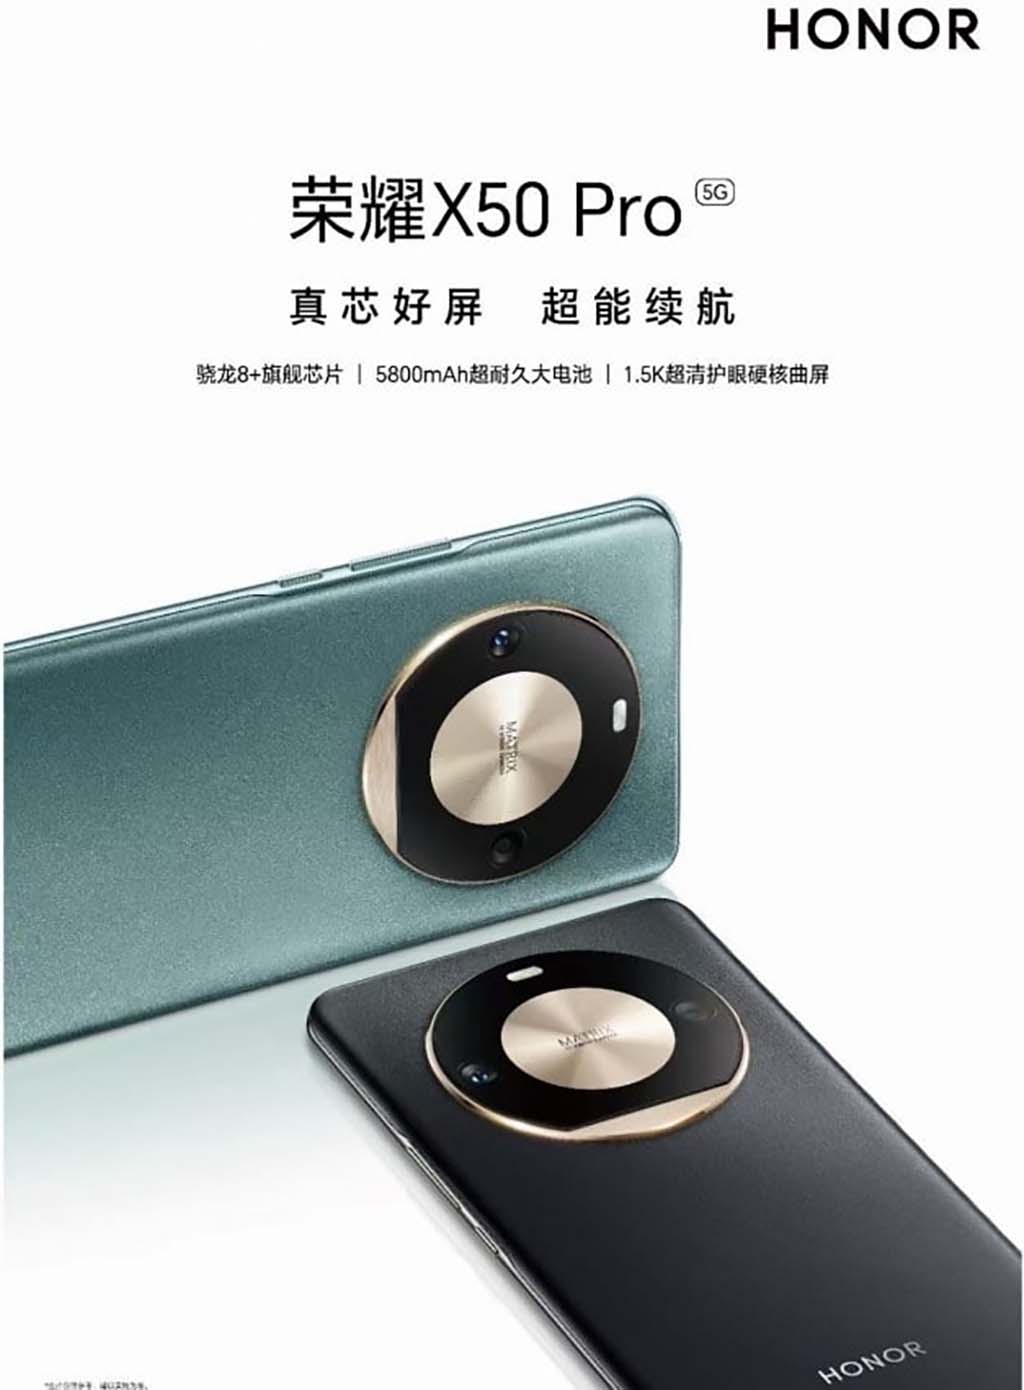 Honor X50 Pro unveiled Snapdragon chip